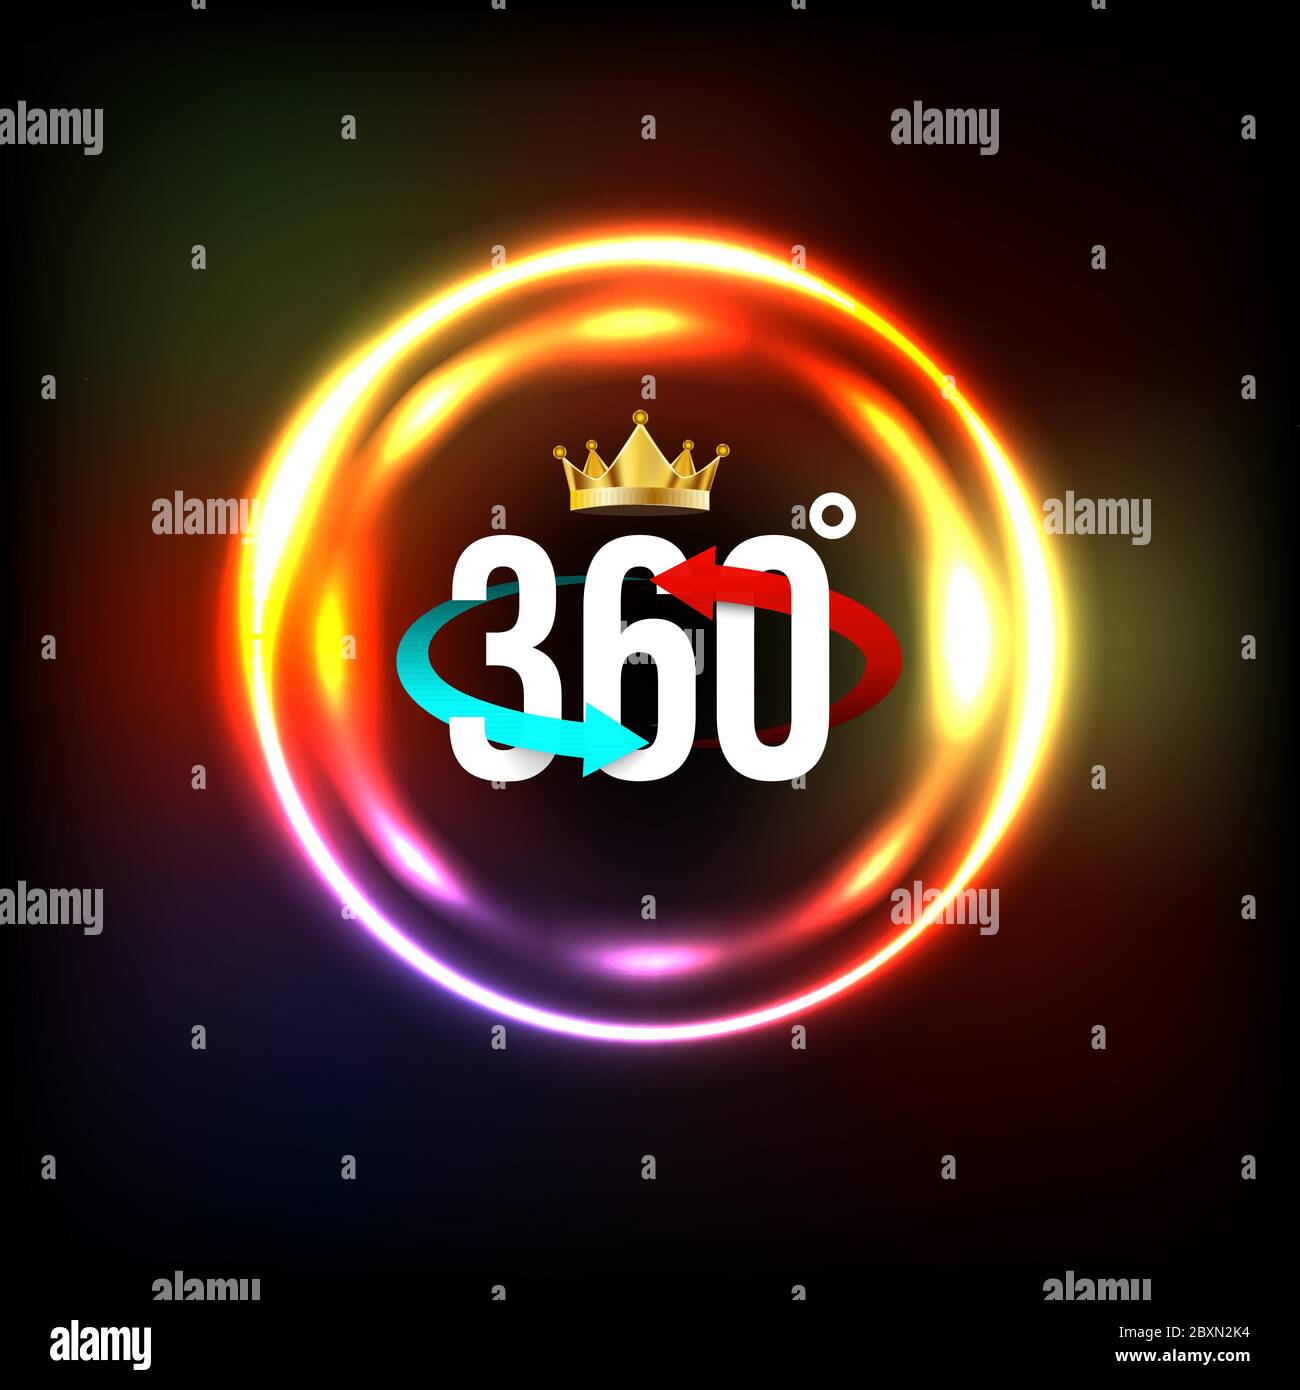 Angle 360 degrees sign with circle light. vector illustration. Stock Vector